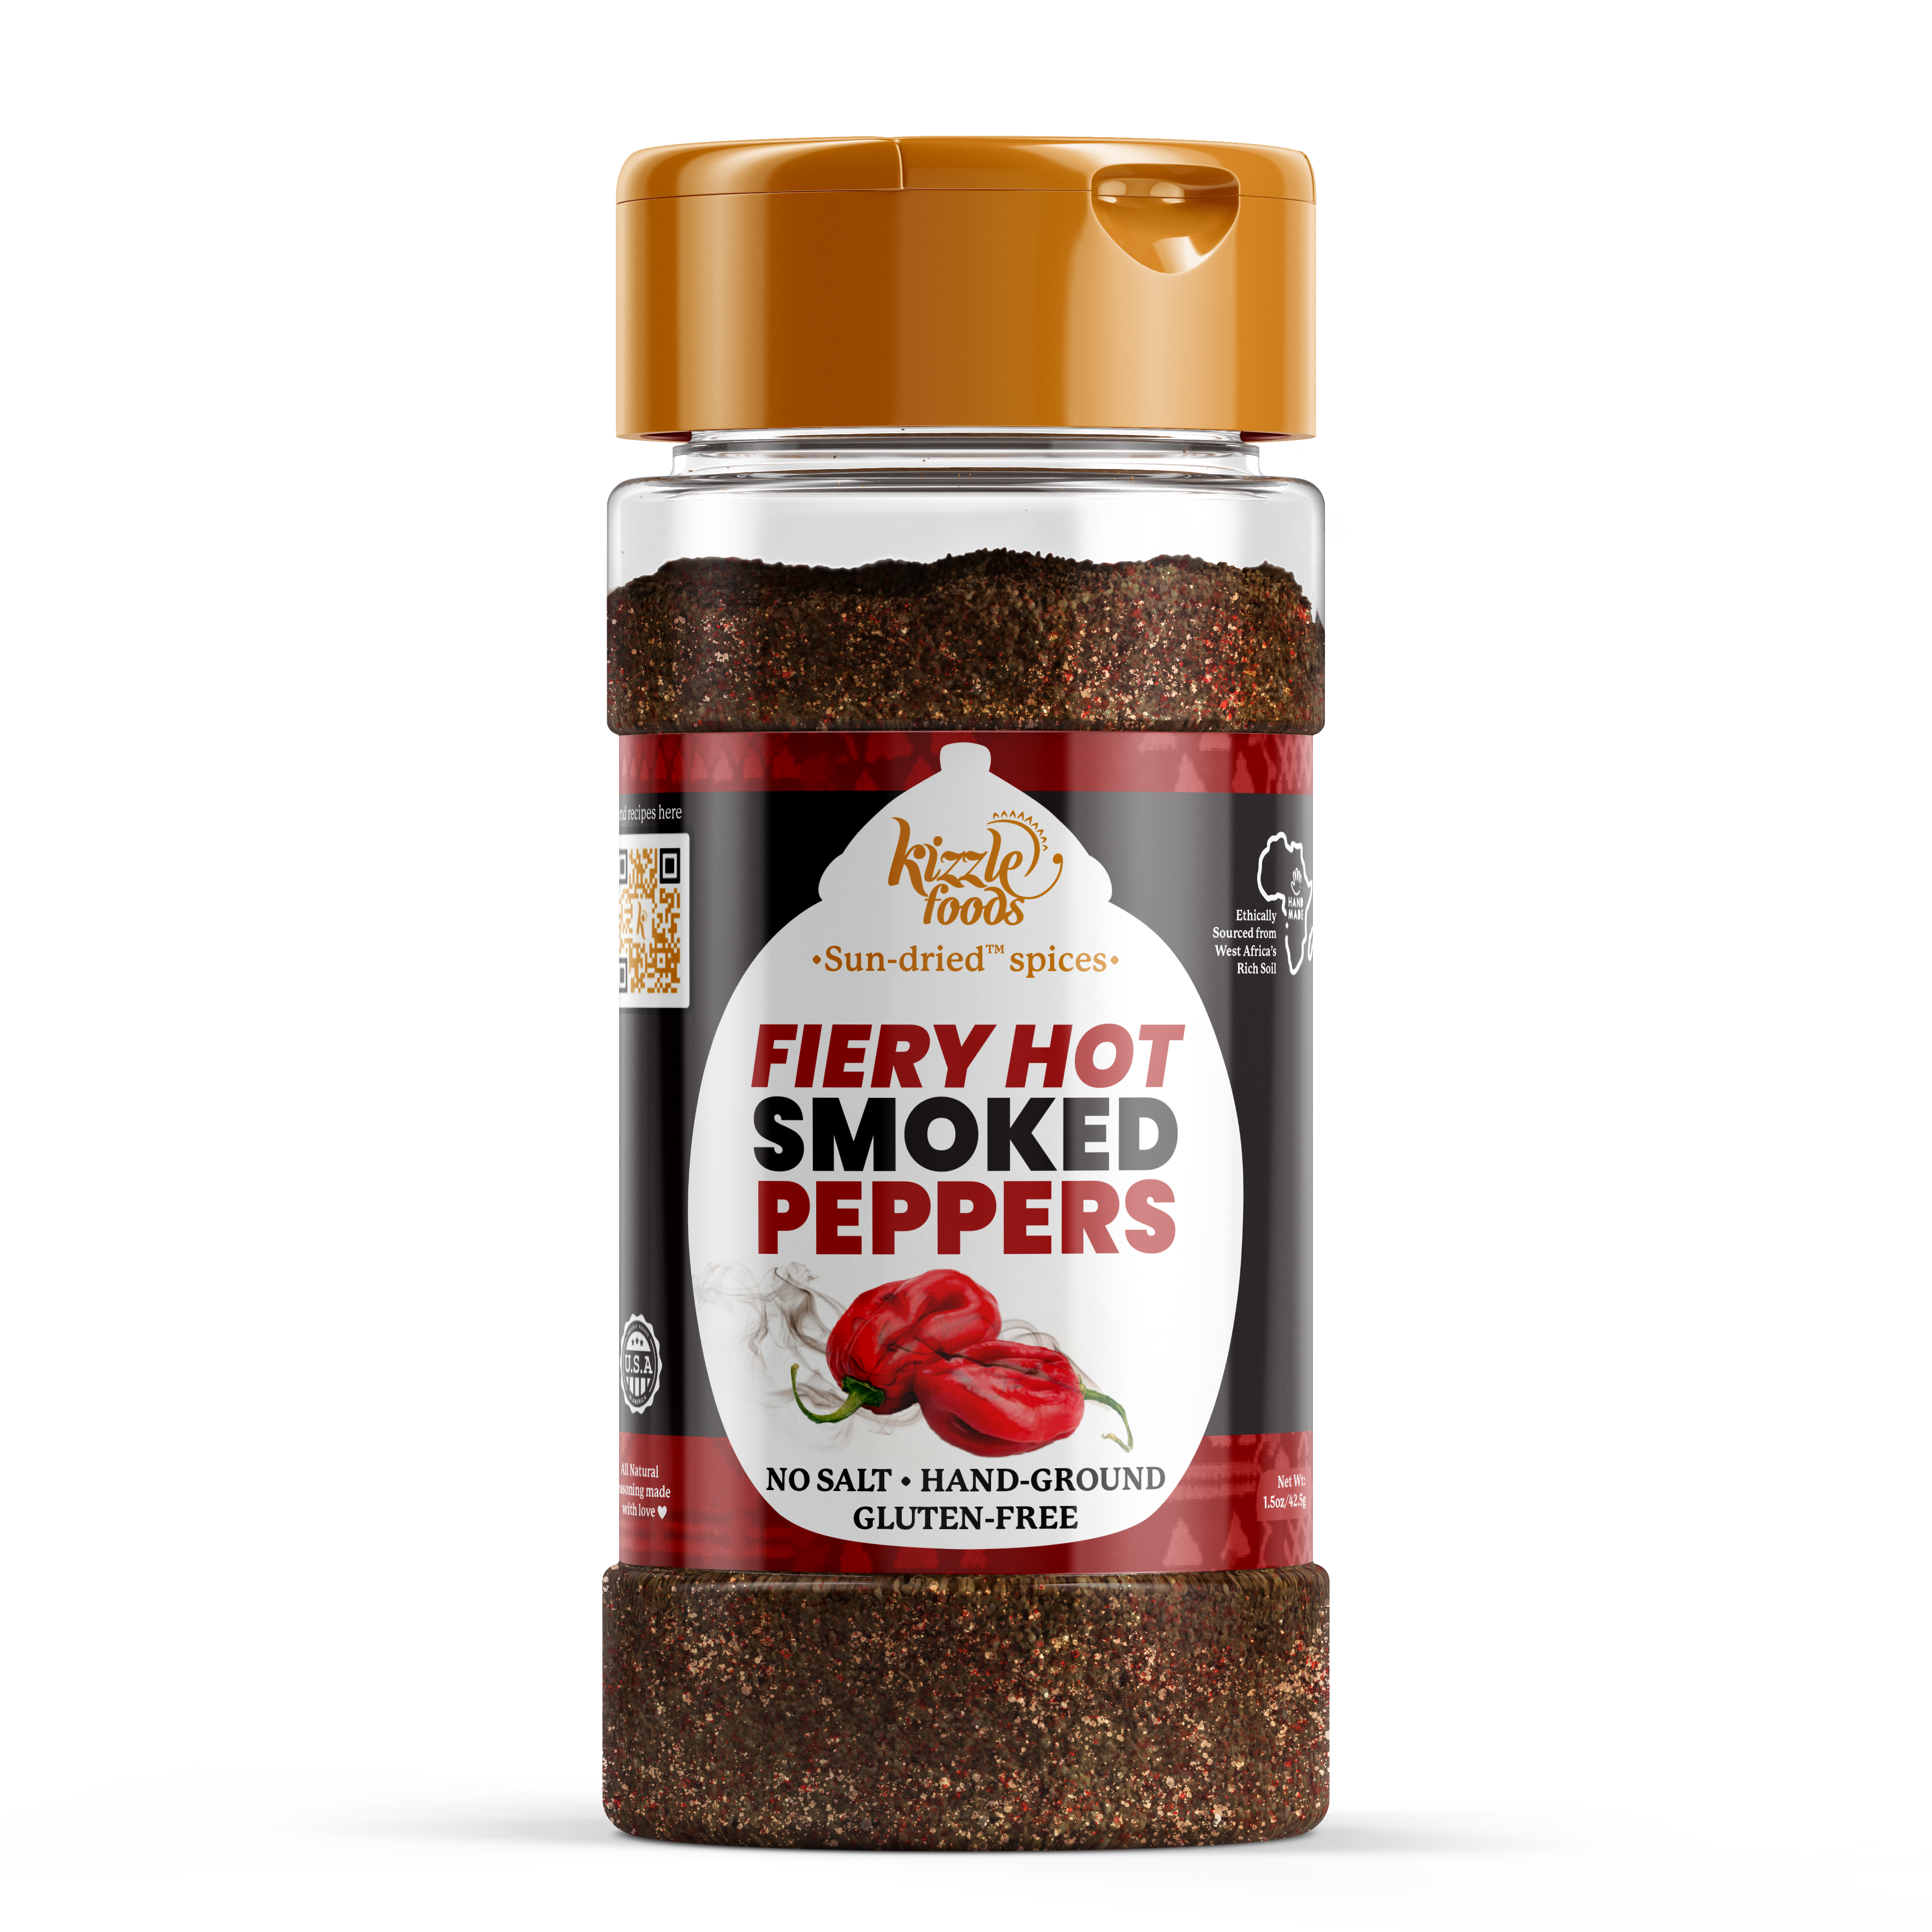 KizzleFoods Fiery HOT, Smoked Peppers 3.45oz